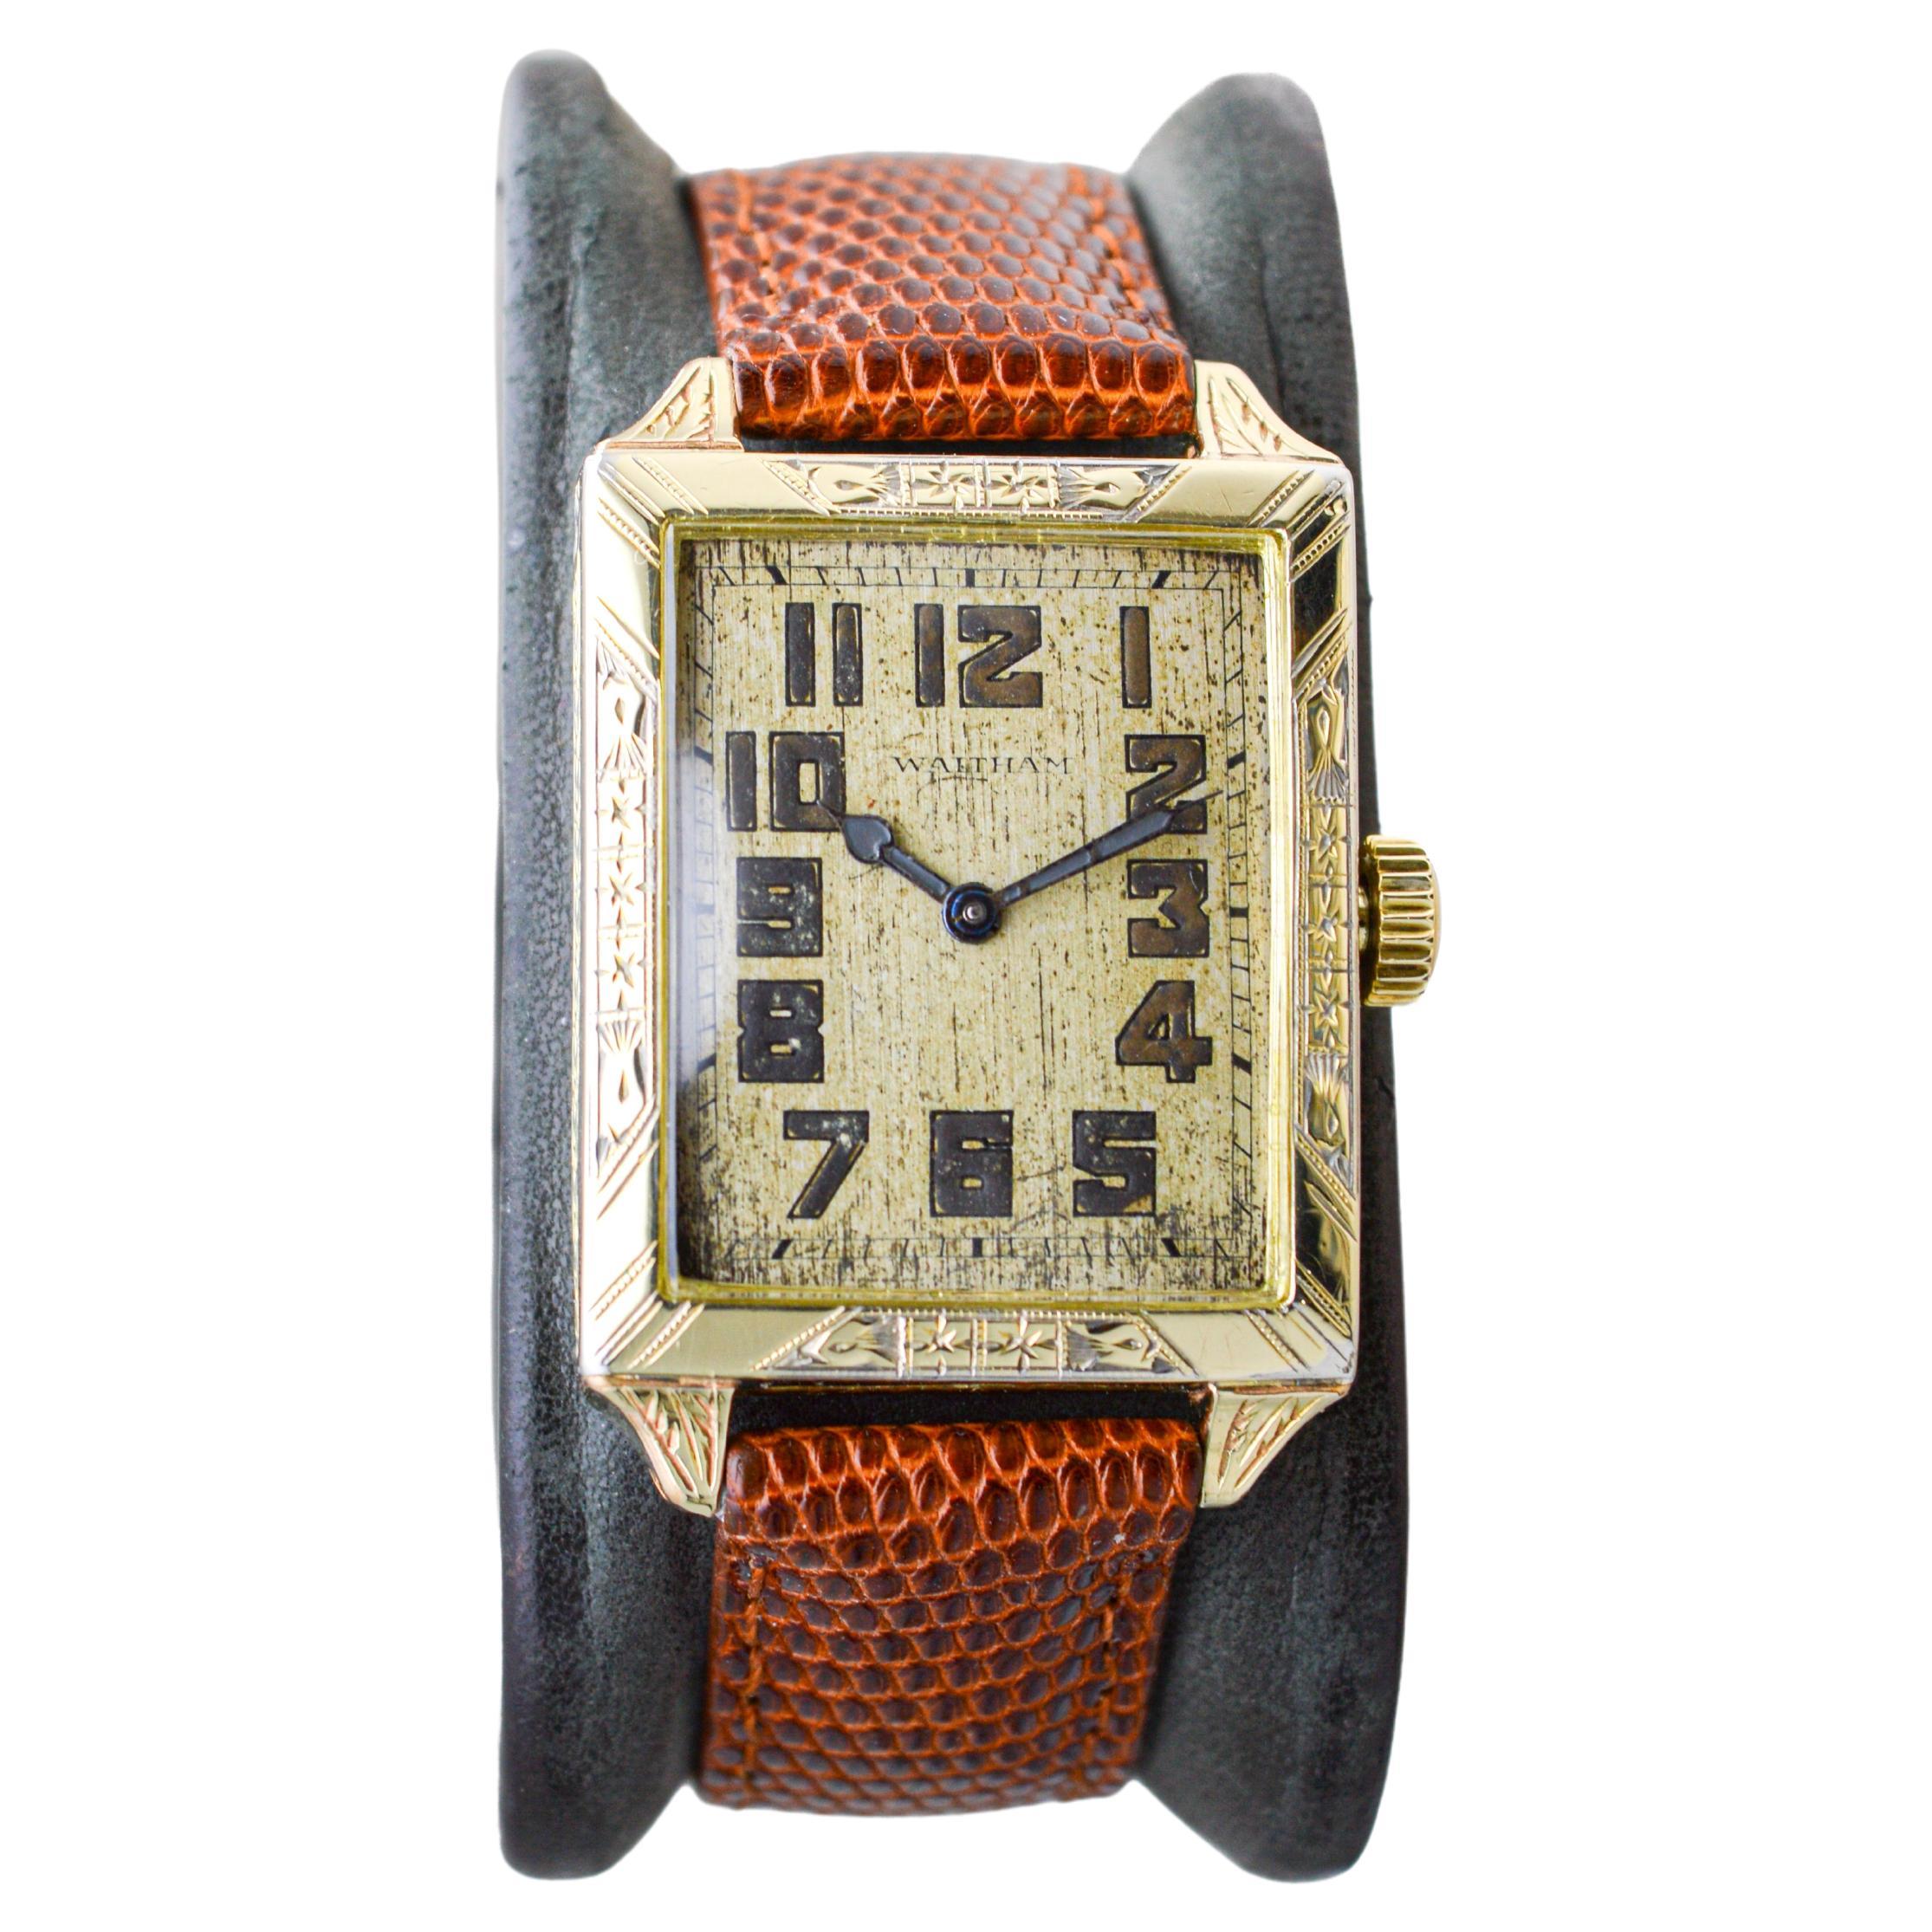 Waltham Yellow Gold Filled Art Deco Watch with Original Dial from 1926 For Sale 7